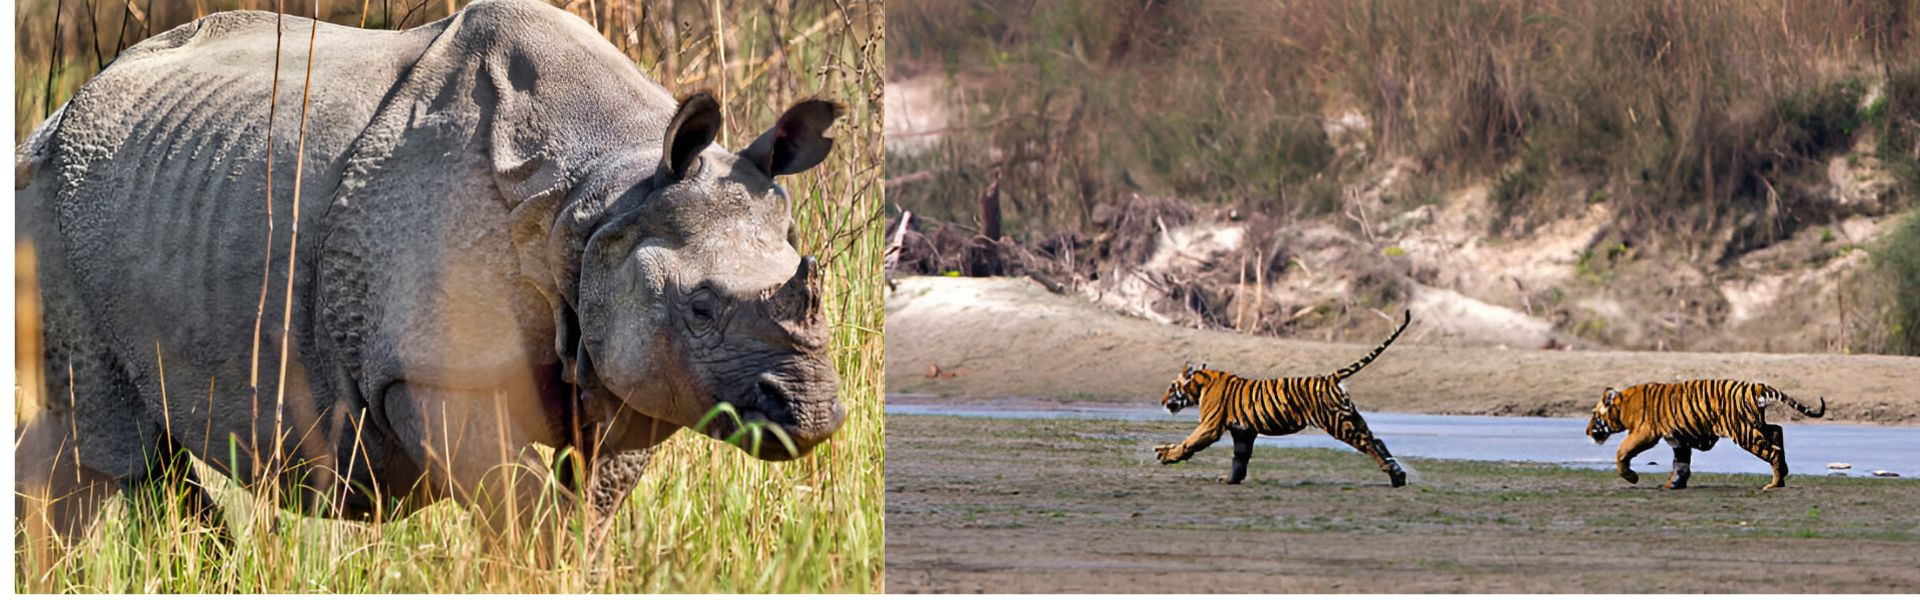 Tracking Bengal Tiger in Bardia National Park Banner